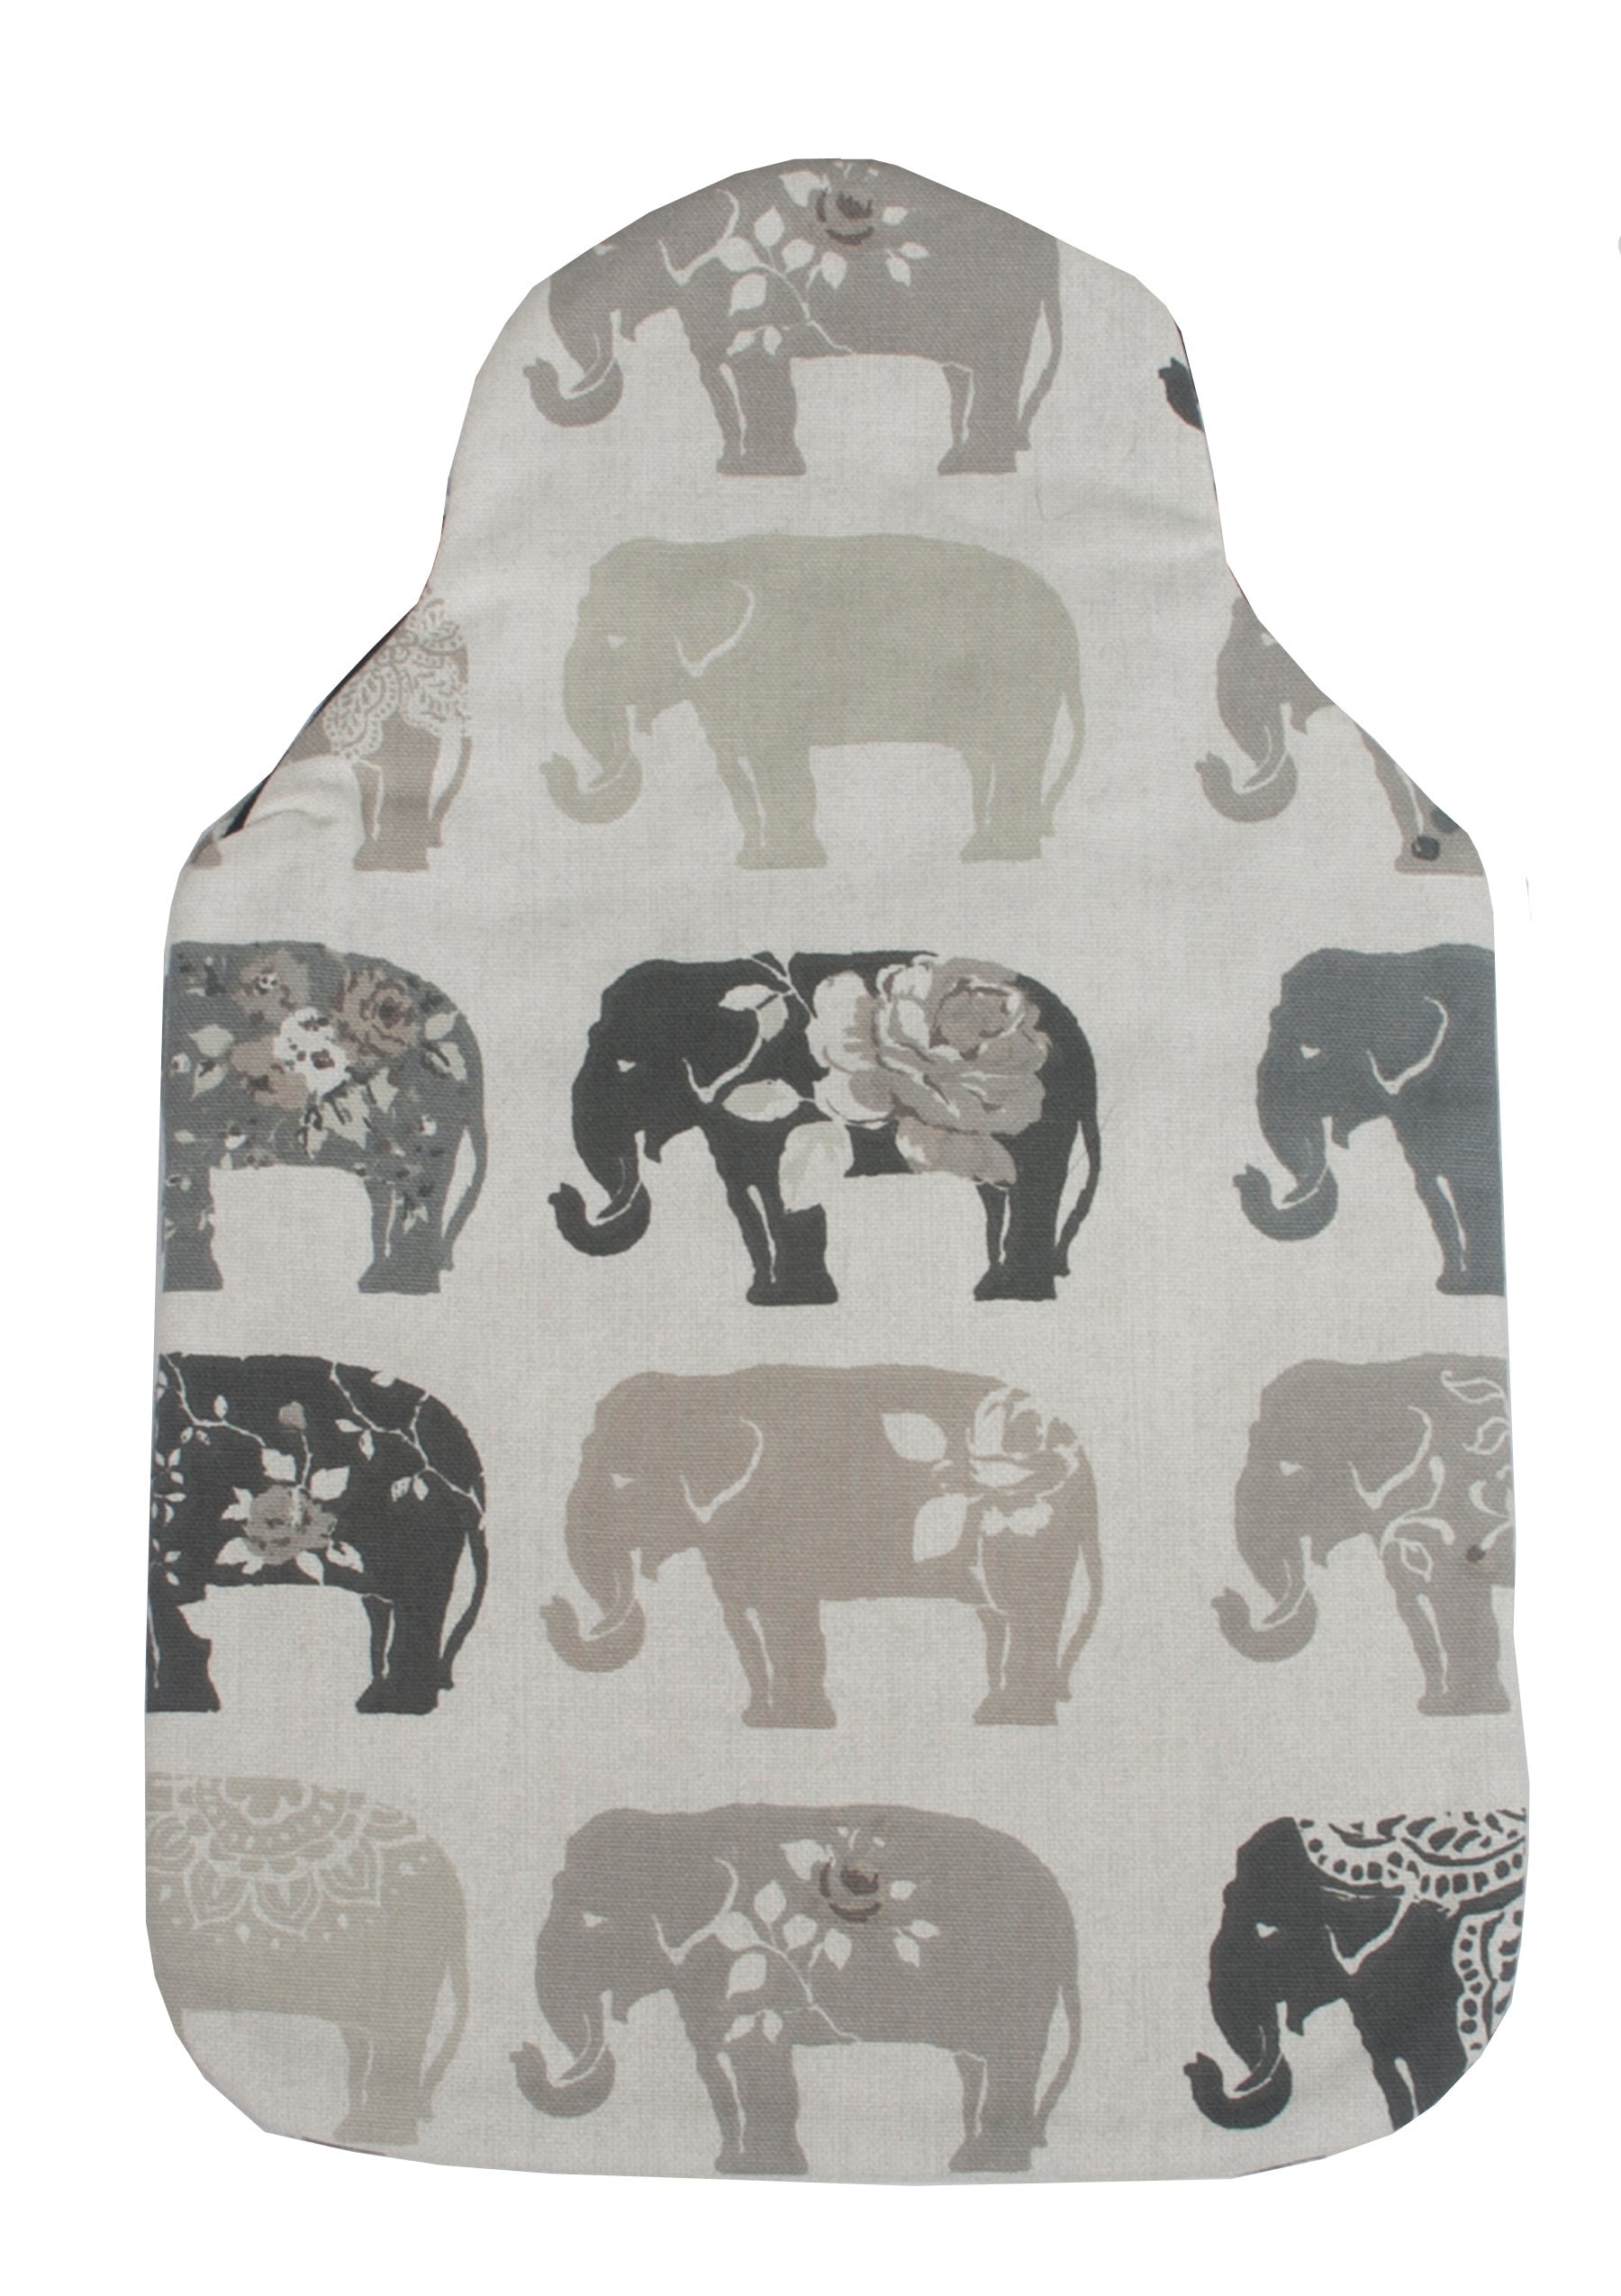 Padded Hot Water Bottle Cover, Grey Elephant